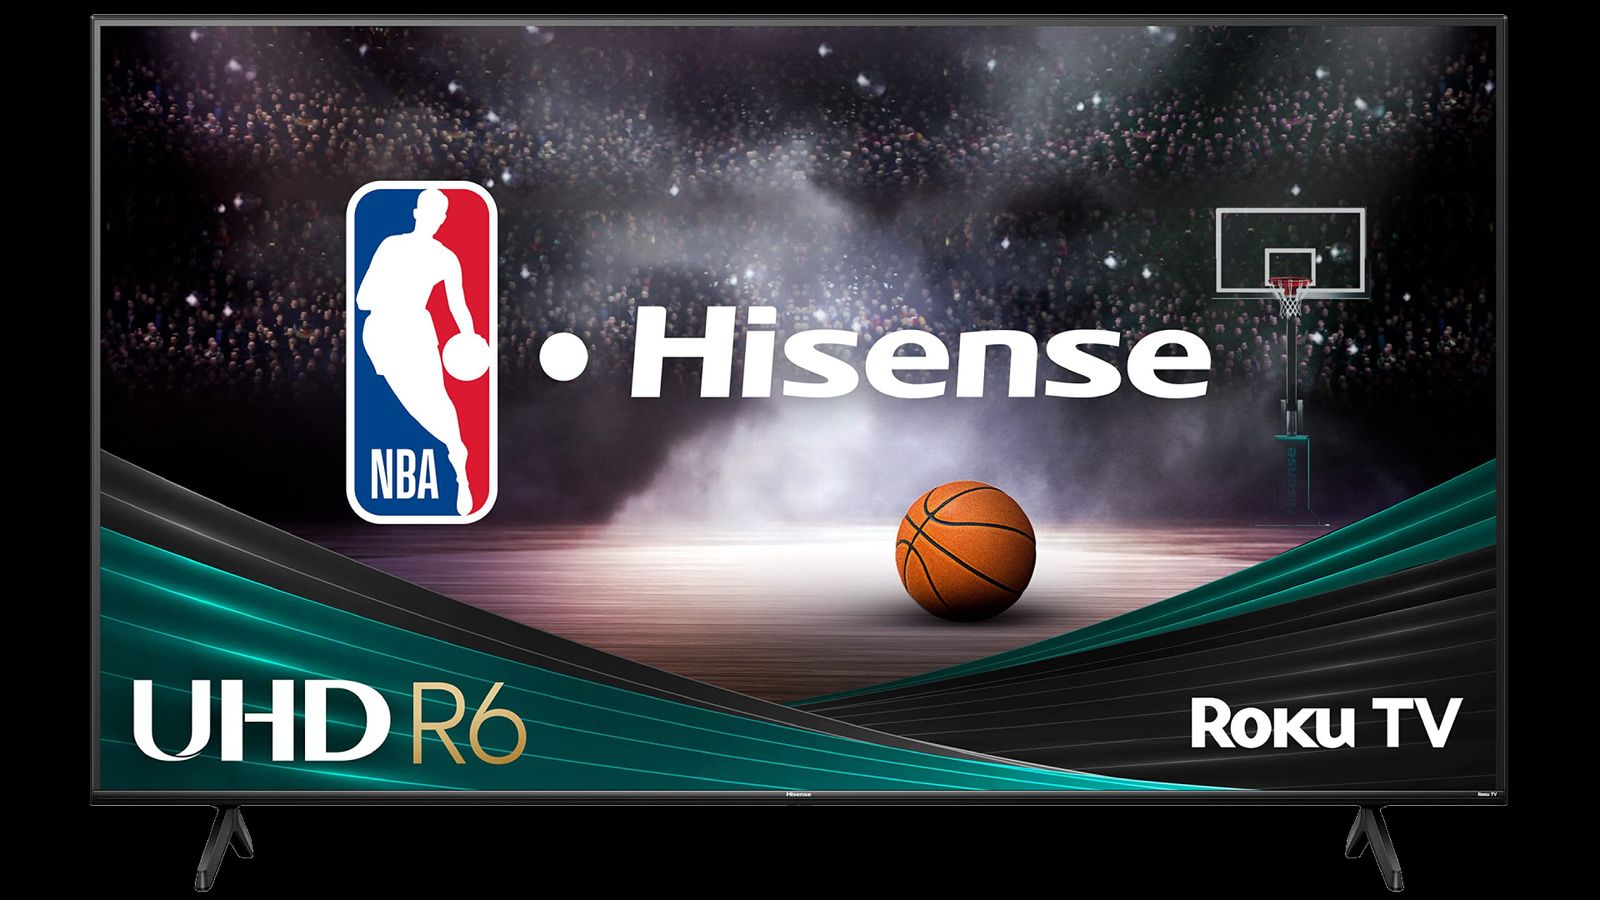 Hisense R6 product image of a black TV featuring the NBA logo and white Hisense branding in front of a basketball hoop on the display.